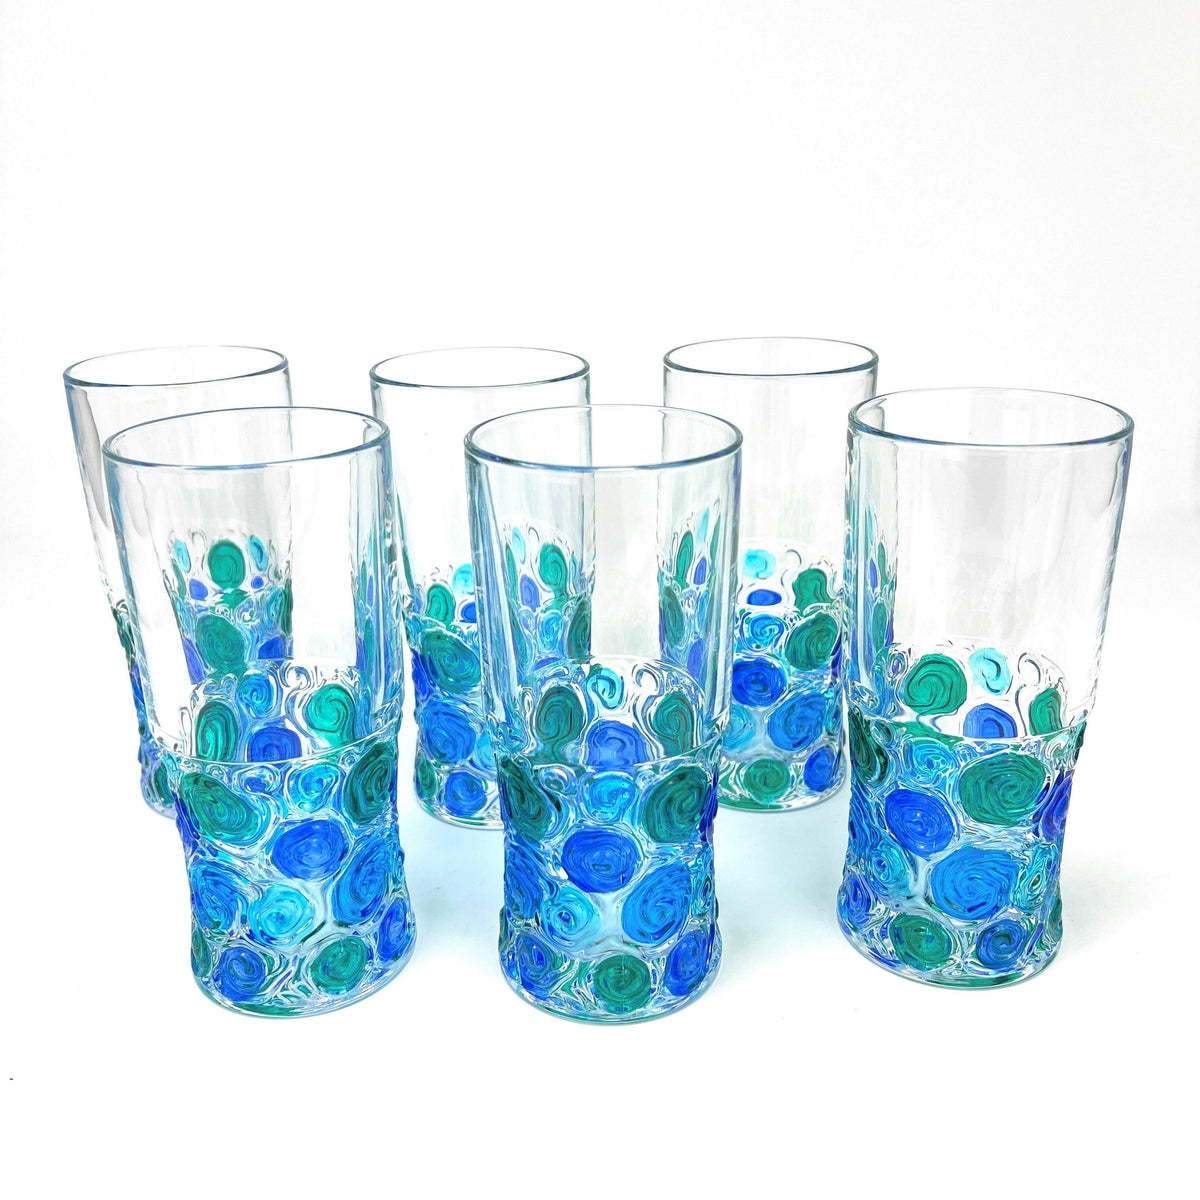 Six Italian Crystal tall drinking glasses with bright blue, green, and turquoise swirls of color on the bottom half.